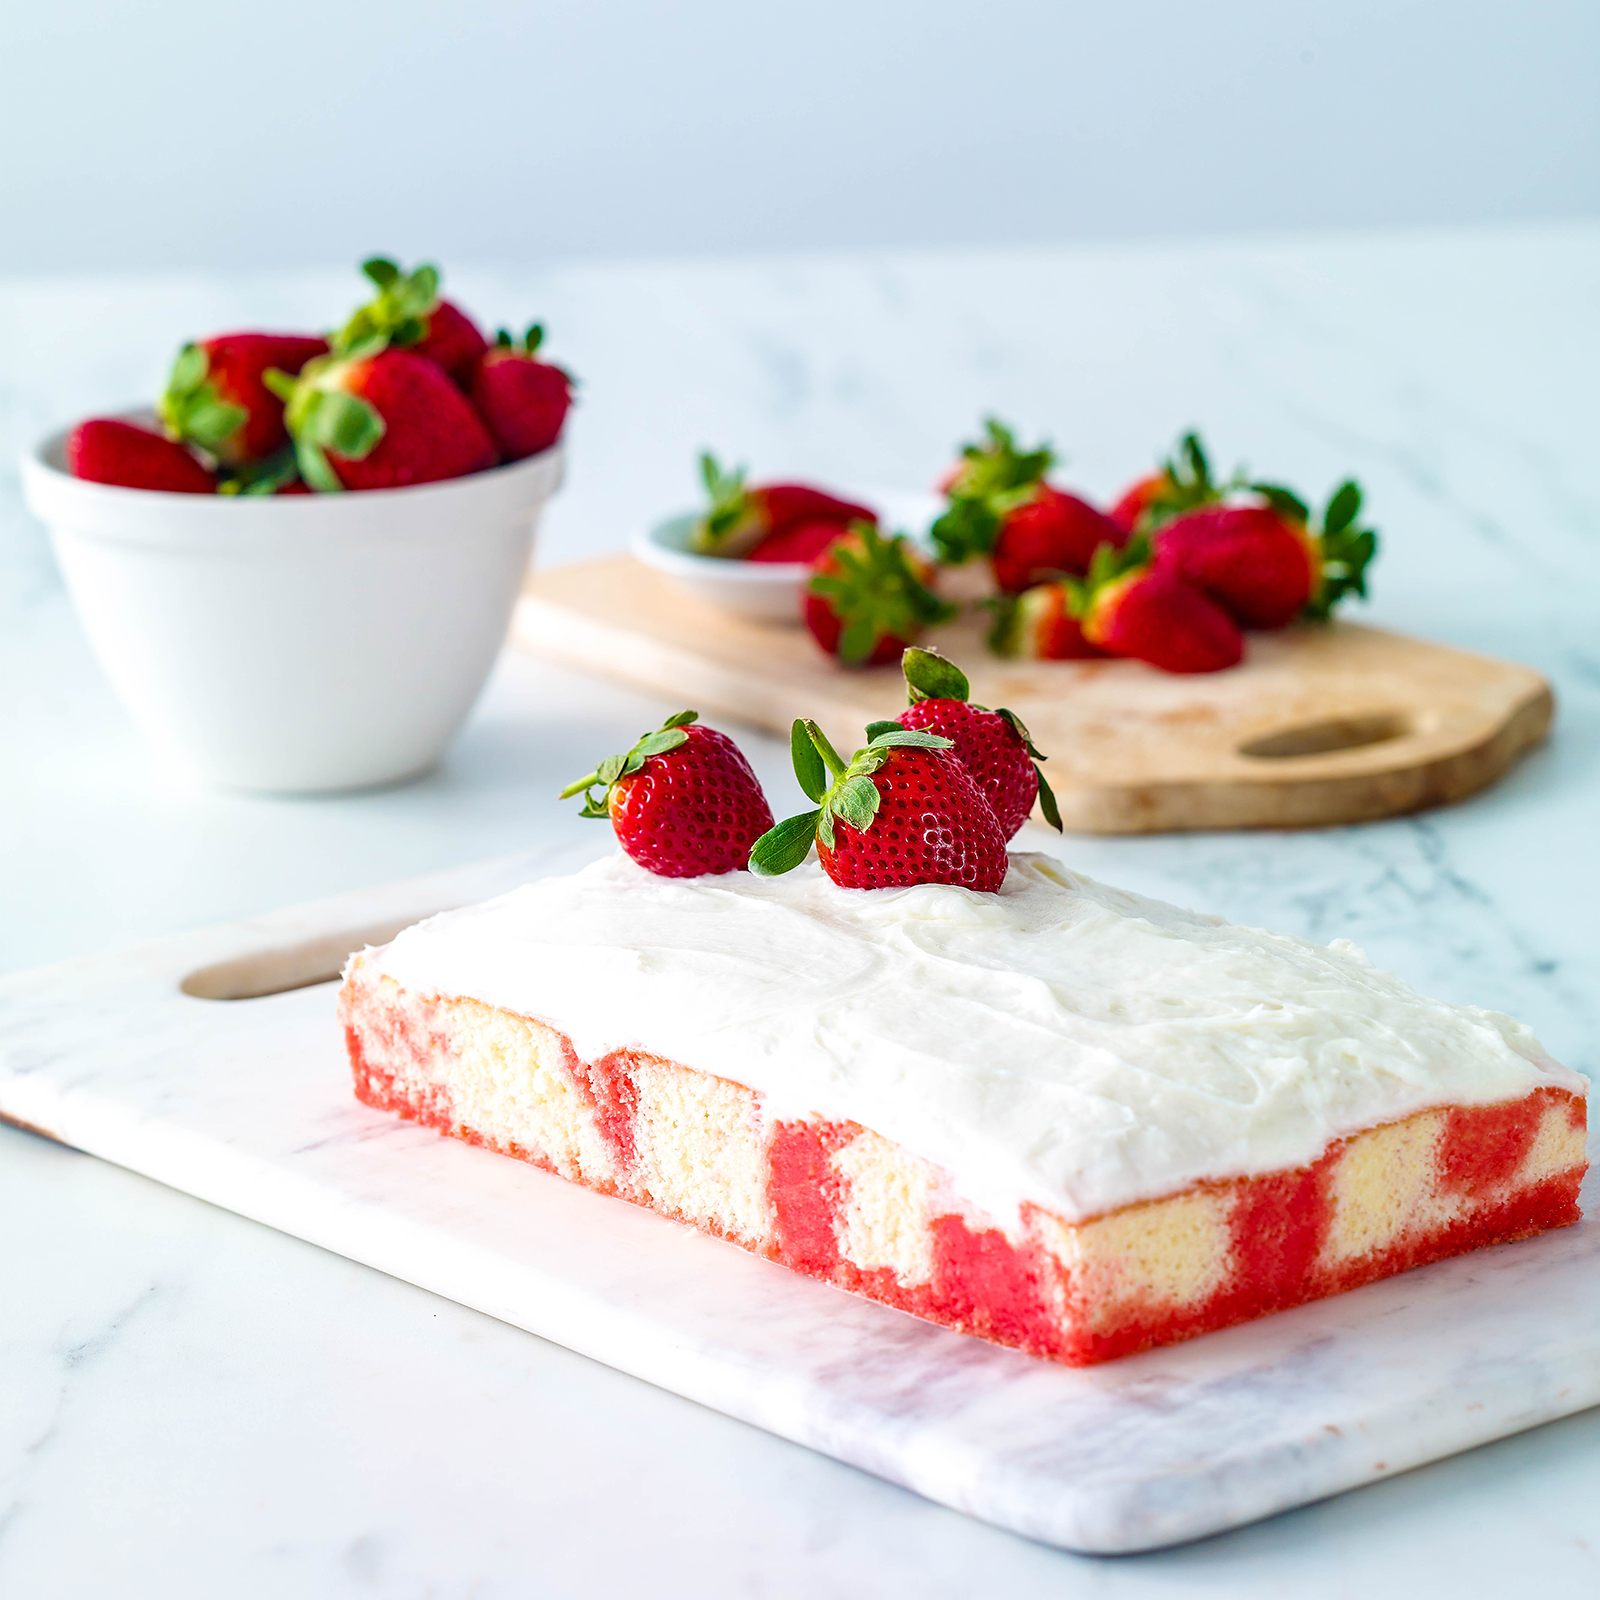 A strawberry poke cake iced with whipped cream reads on a marble cutting board. Fresh strawberries decorated the top of the gluten-free cake. More fresh strawberries are in a bowl and on a wooden board behind the cake.